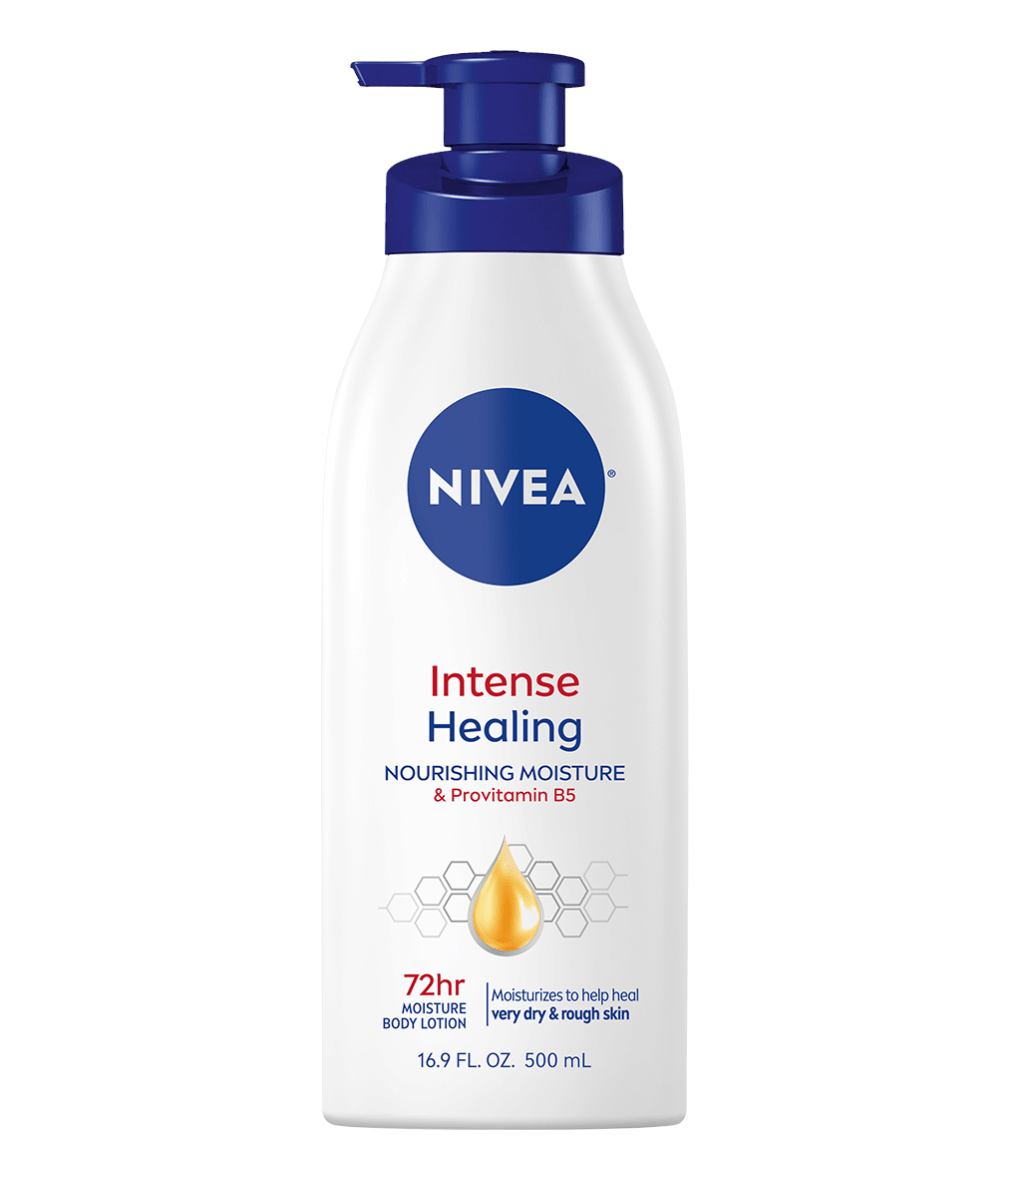 Intense Healing Body Lotion for extremely dry skin